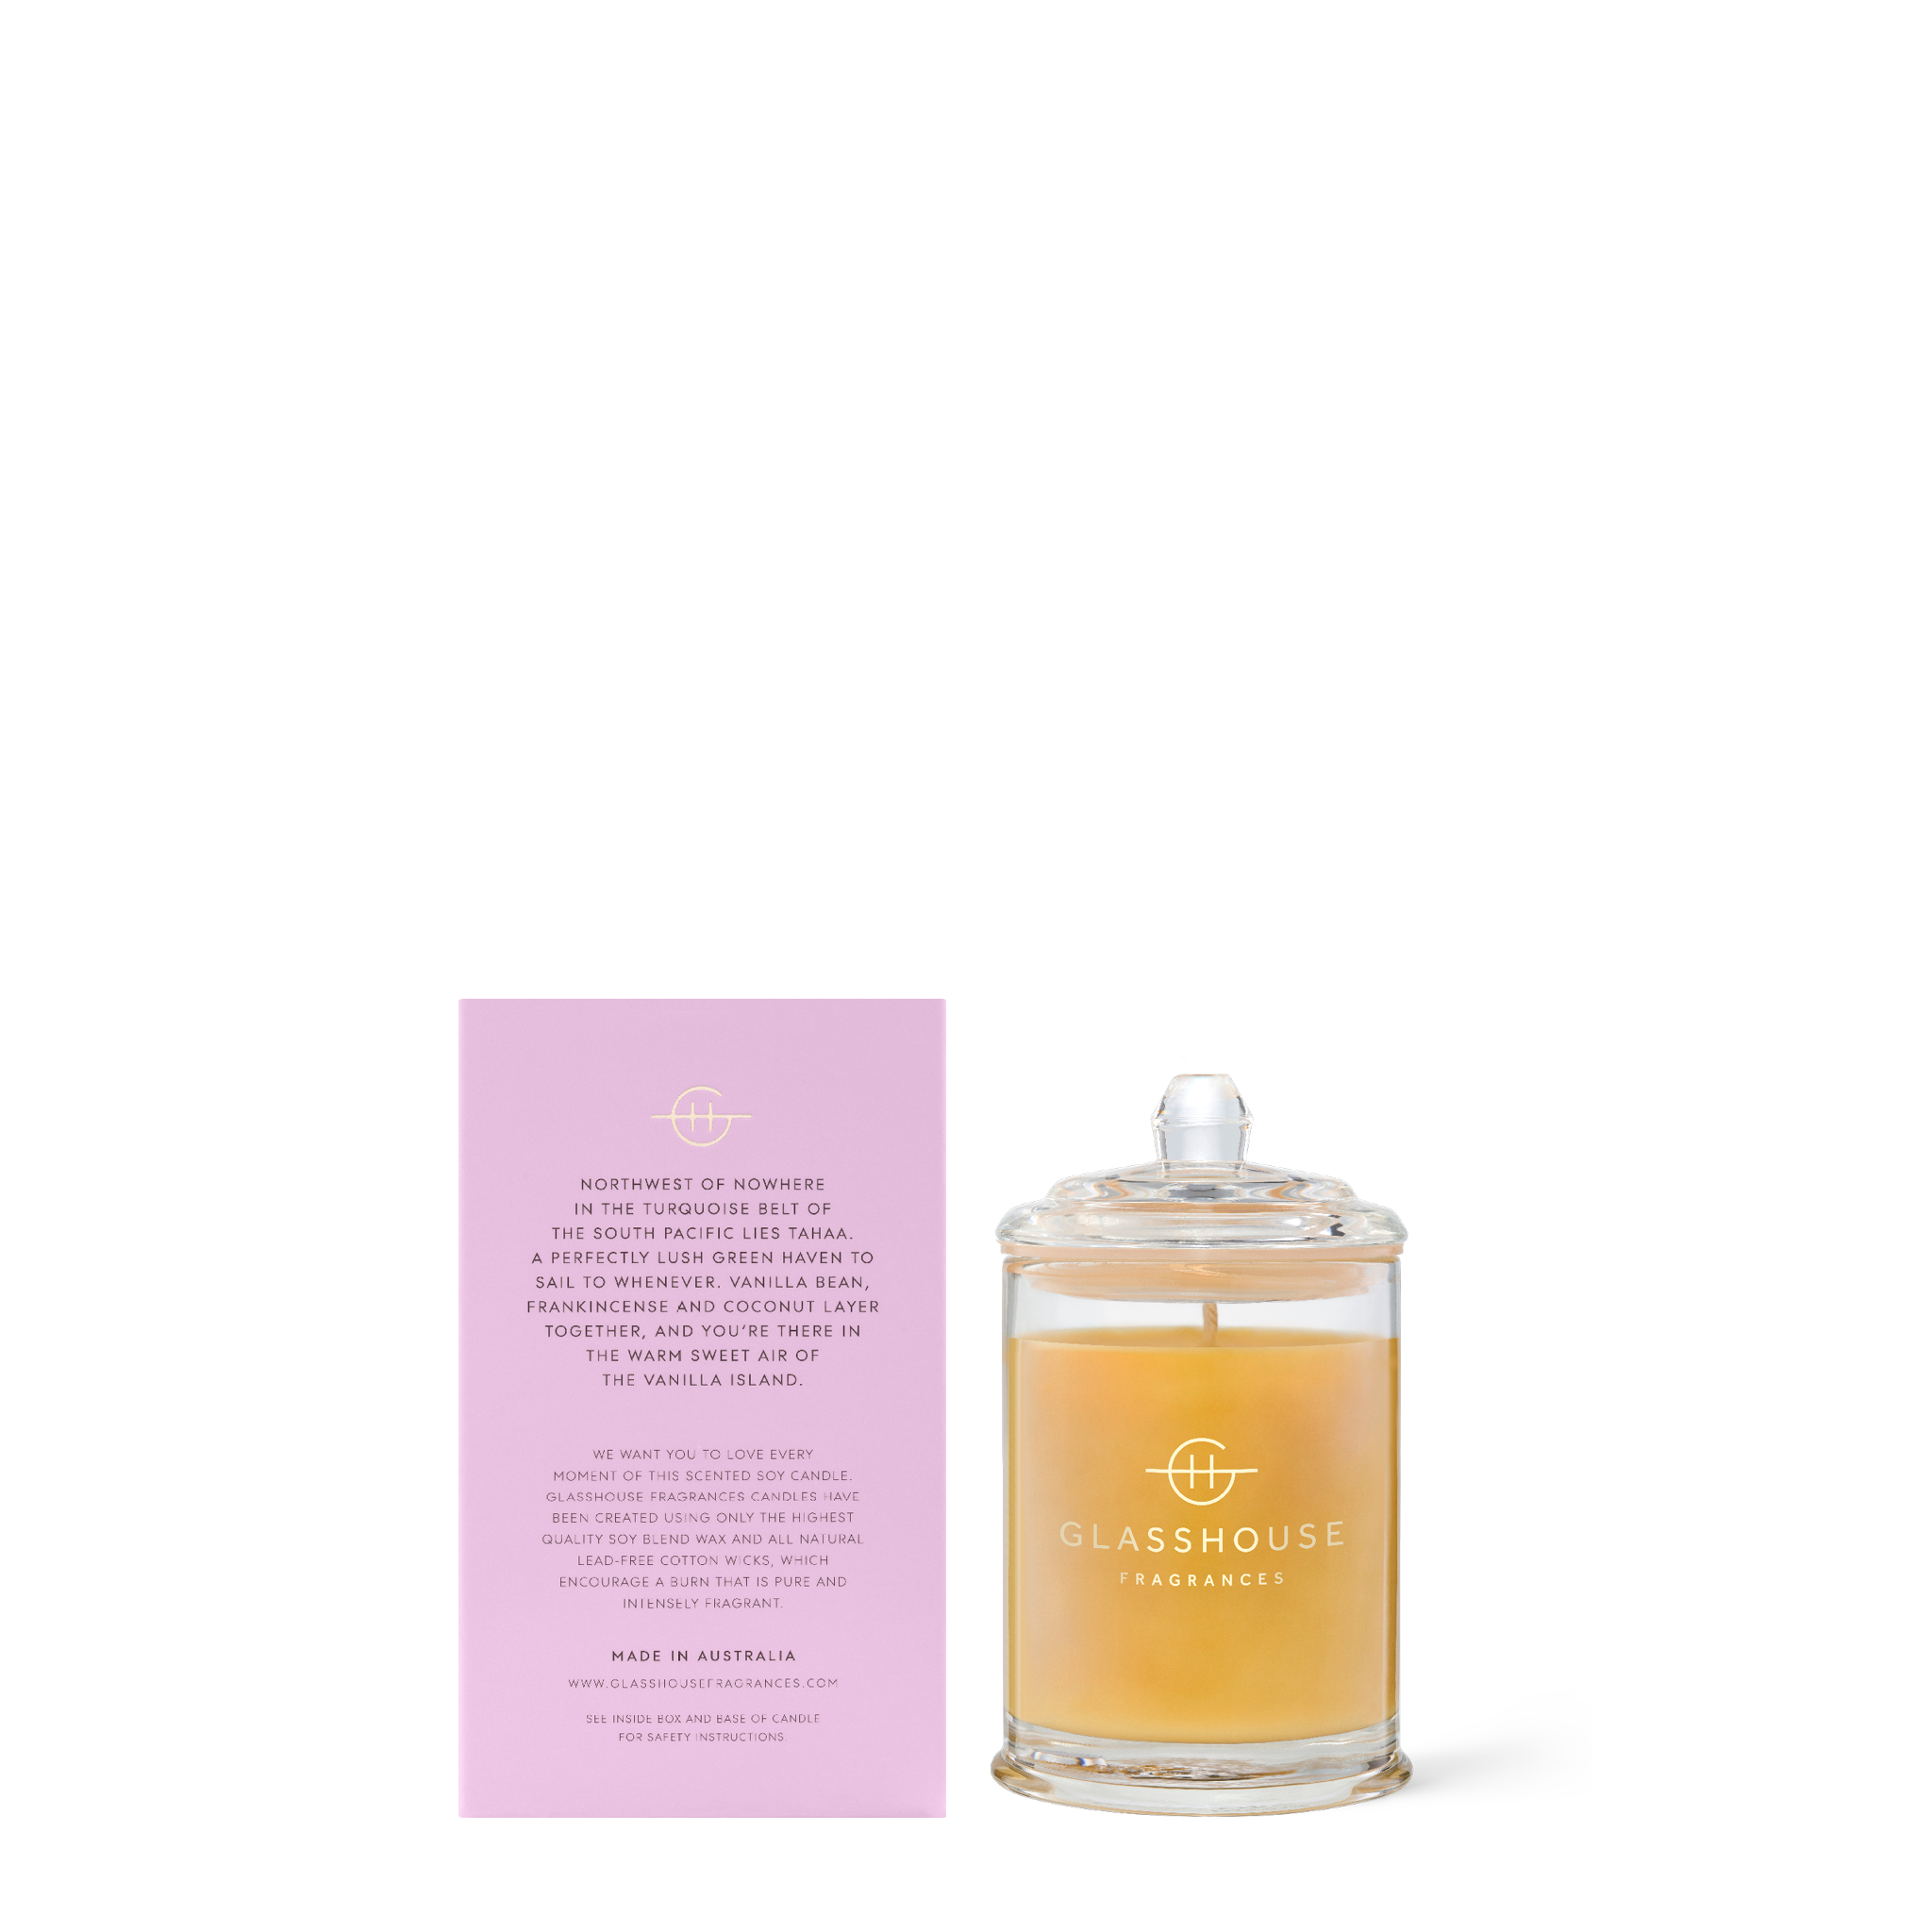 Glasshouse Fragrances A Tahaa Affair Vanilla Caramel 60g Soy Candle with box - Back of product shot